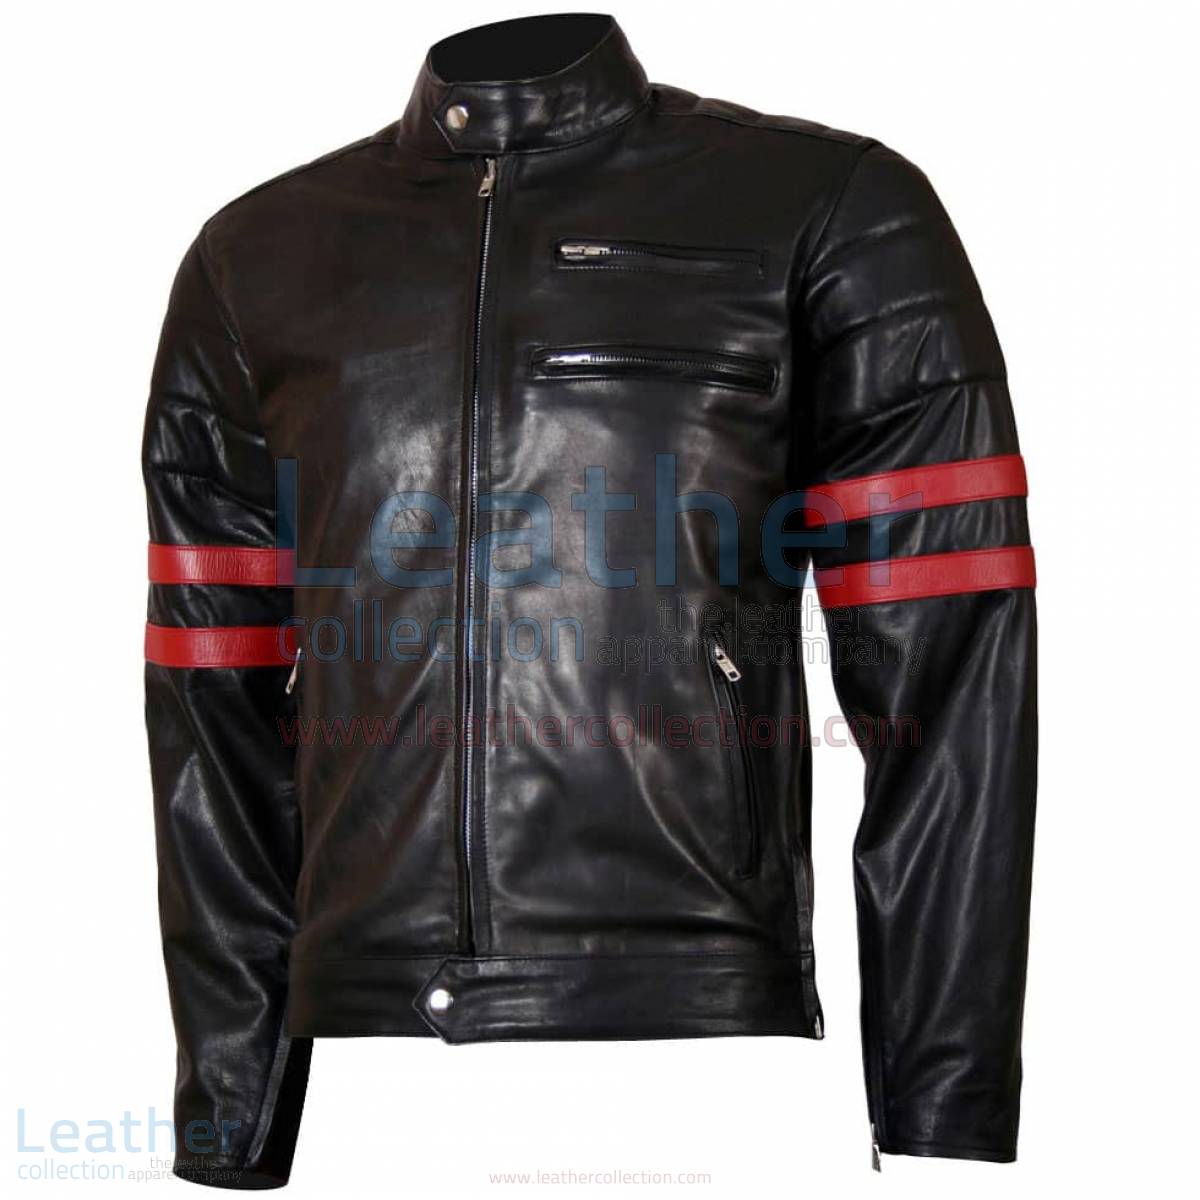 red and black motorcycle jacket